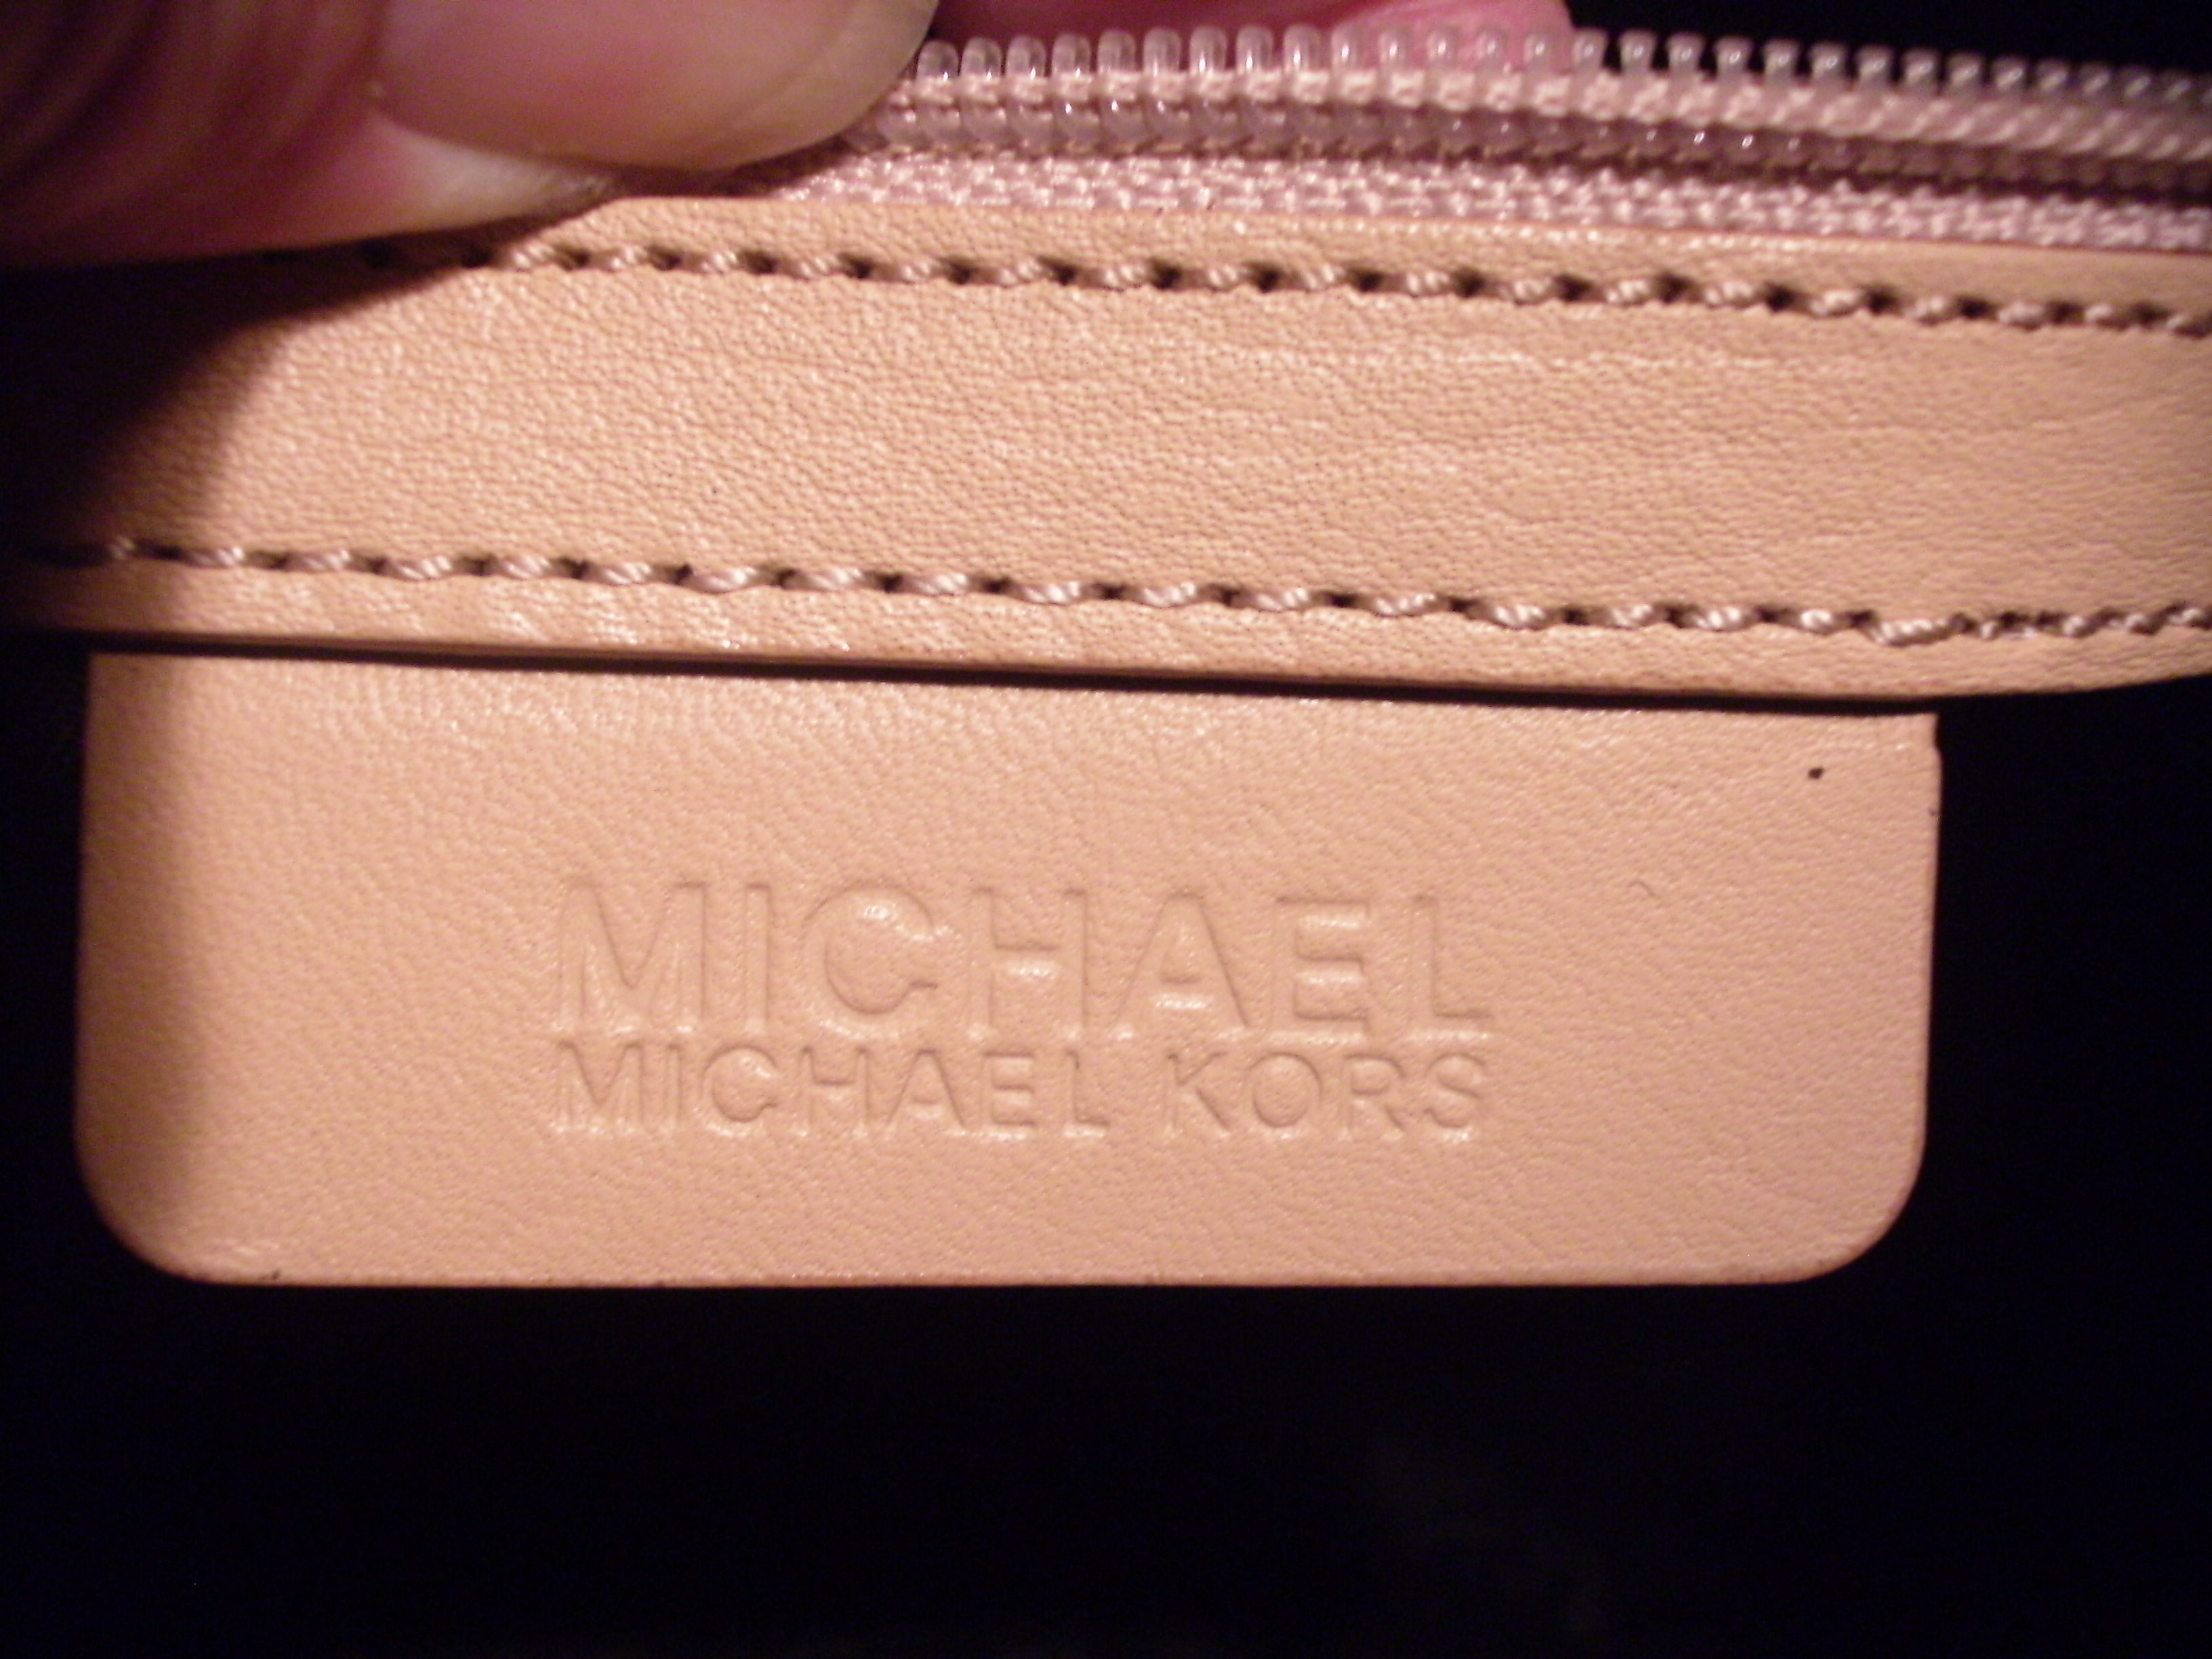 michael kors purse made in china